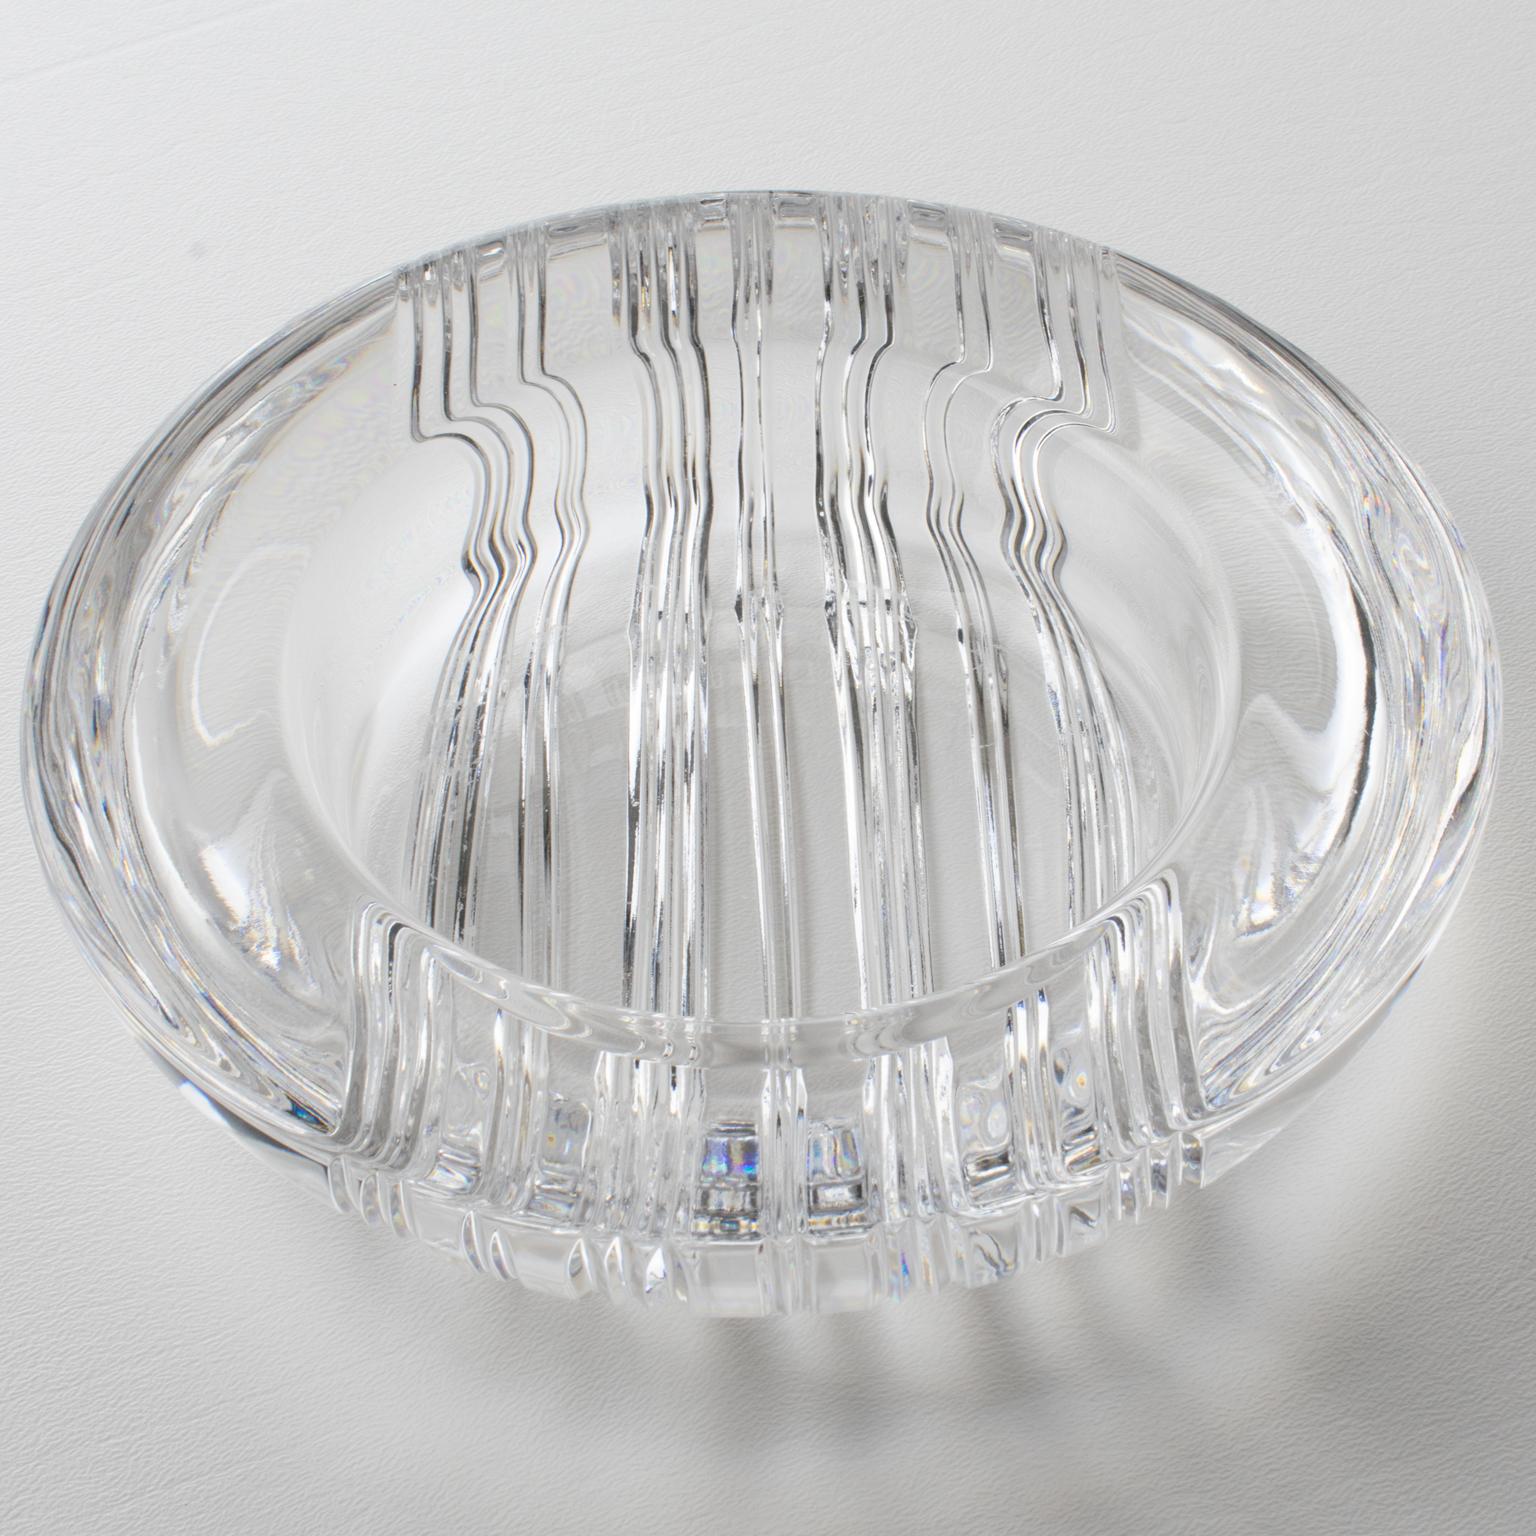 Late 20th Century Christian Dior Crystal Cigar Ashtray Bowl Dish Catchall Vide Poche For Sale